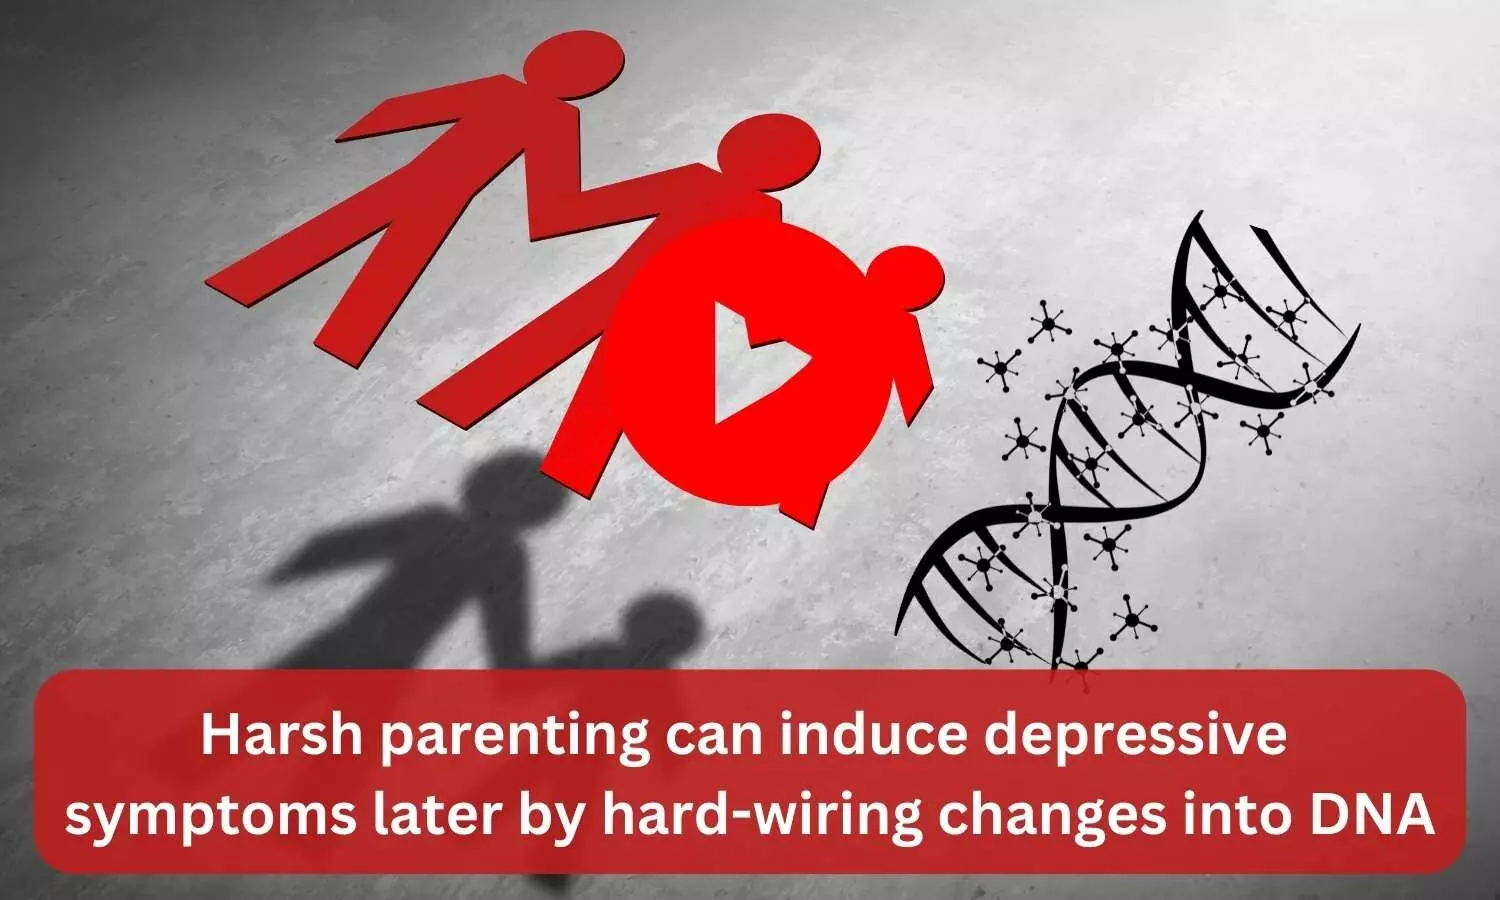 Harsh parenting can induce depressive symptoms later by hard-wiring changes into DNA